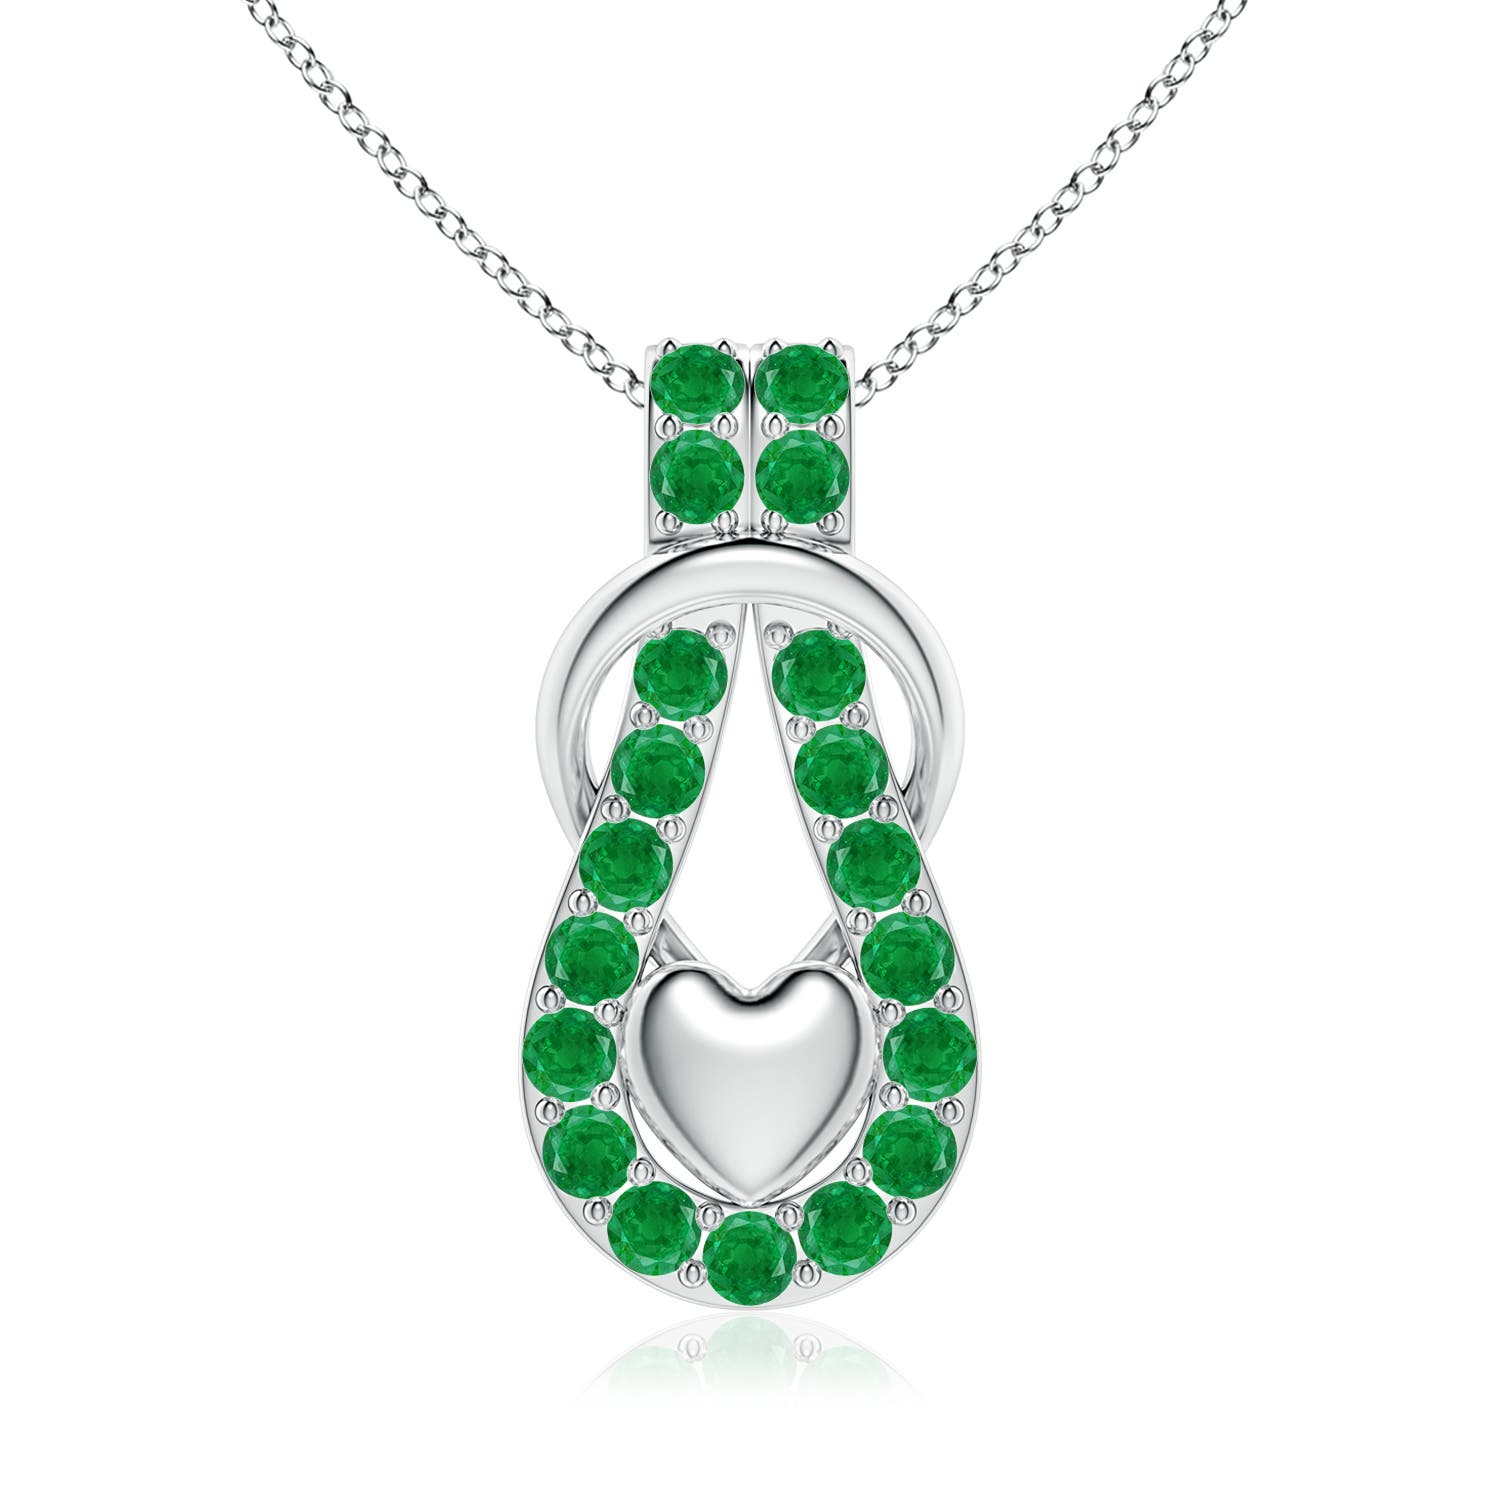 AA - Emerald / 2.85 CT / 18 KT White Gold